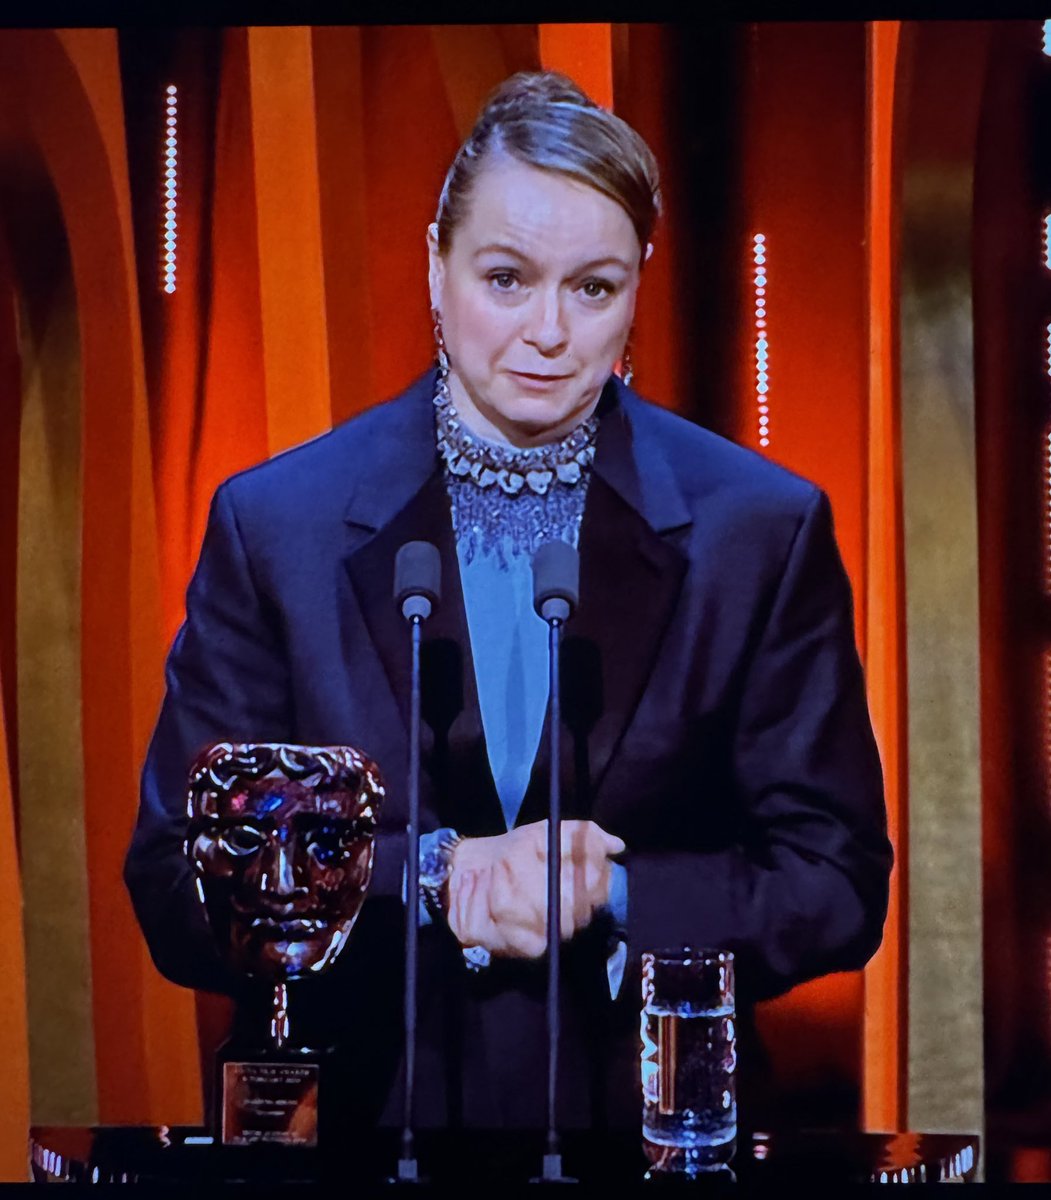 Incredible to hear Samantha Morton @samthesparrow dedicate her #BAFTA Fellowship to 'Every child in care today, who has been in care and who didn’t survive.' Such a powerful speech from a brilliant actress #CareExperience #ChildrensSocialCare #CareSystem